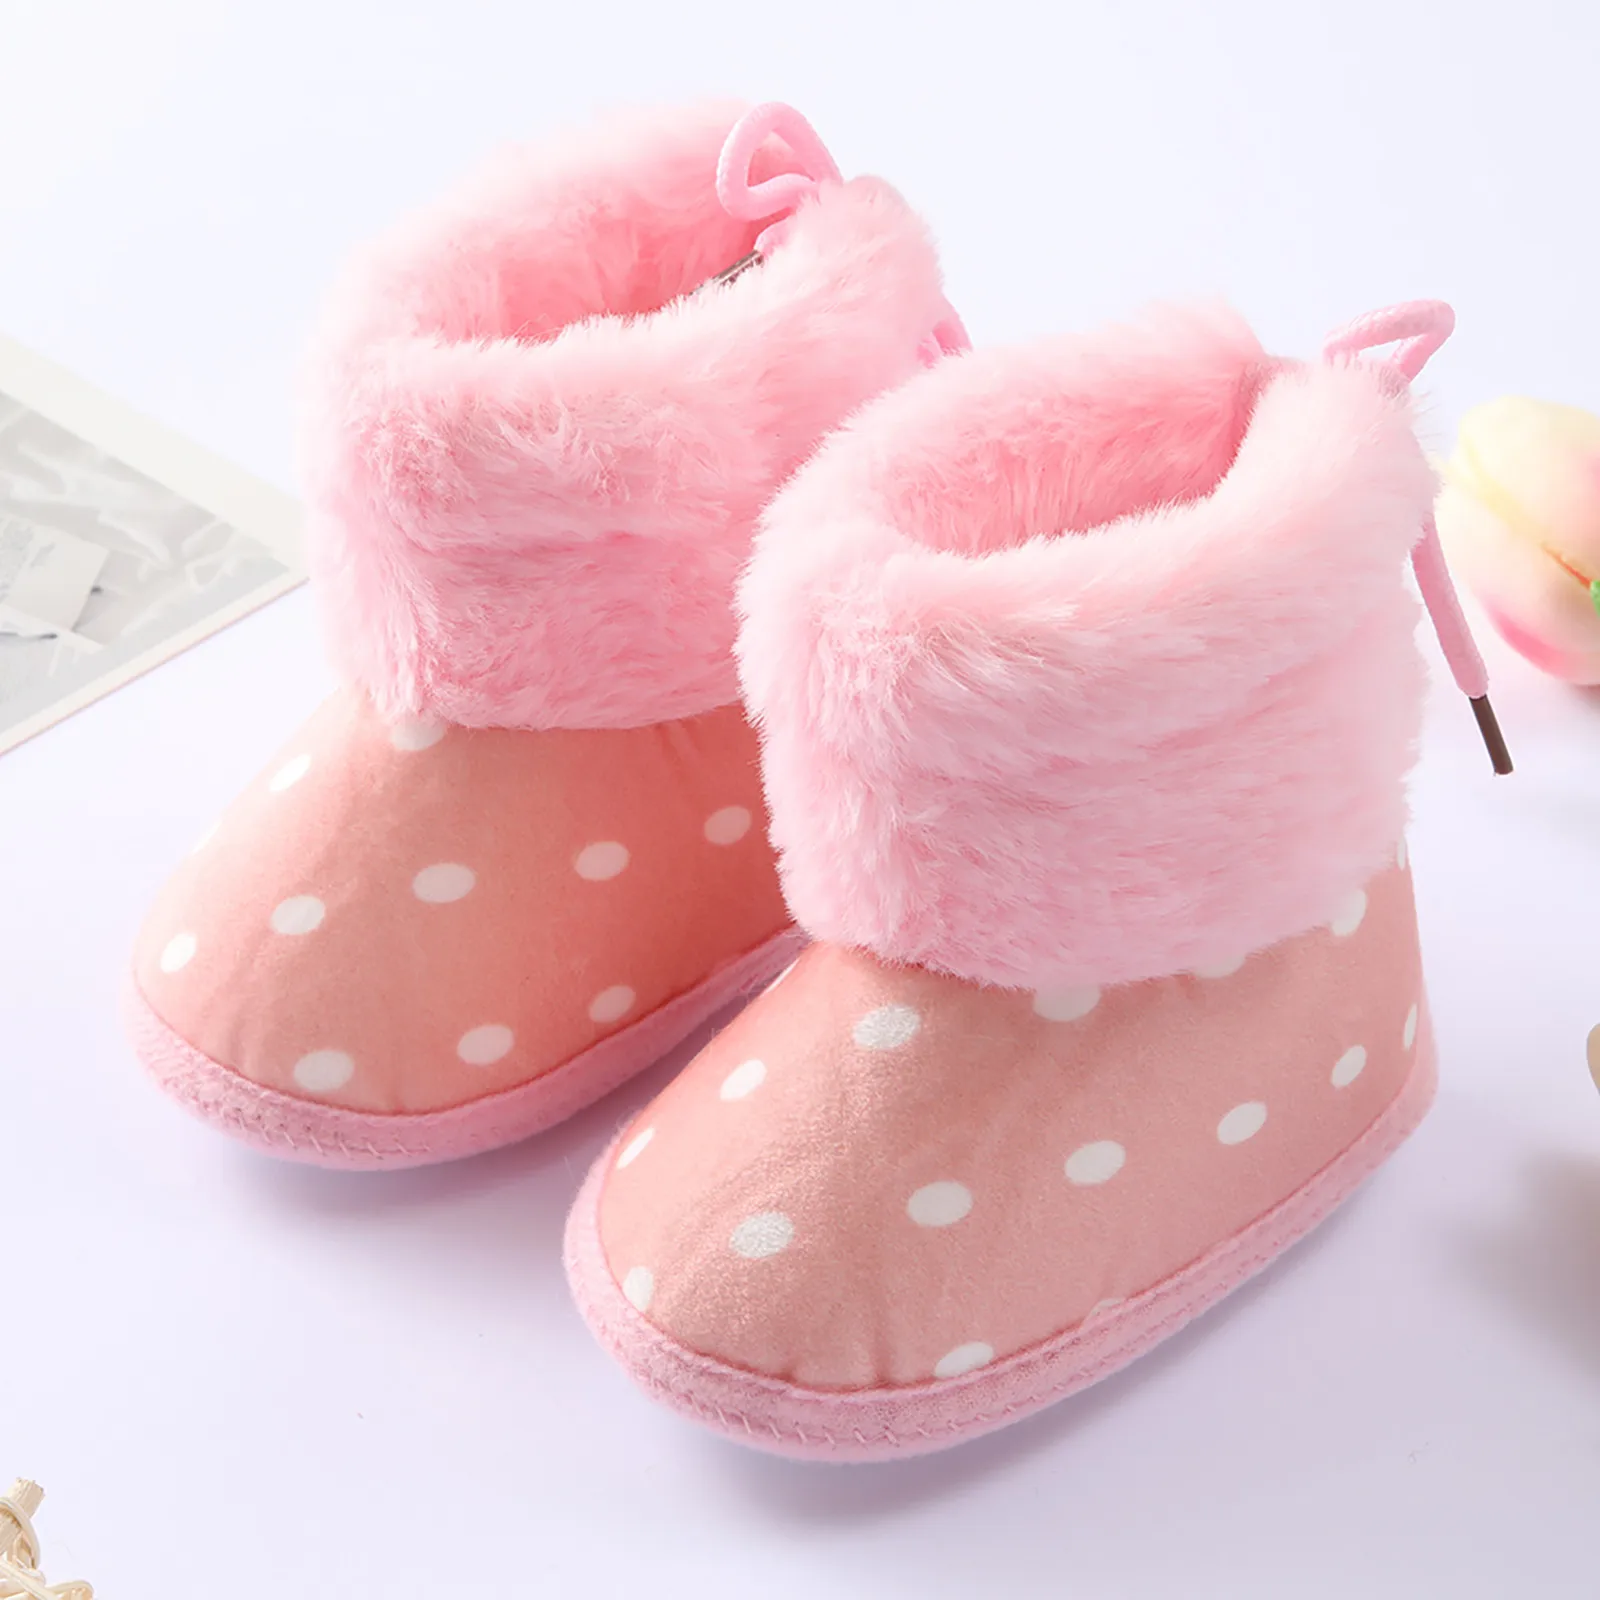 Baby Bling Crystal Sheepskin Style Snowboots 0/6 6/12 Months Perfect for Christmas! Shoes Girls Shoes Boots 